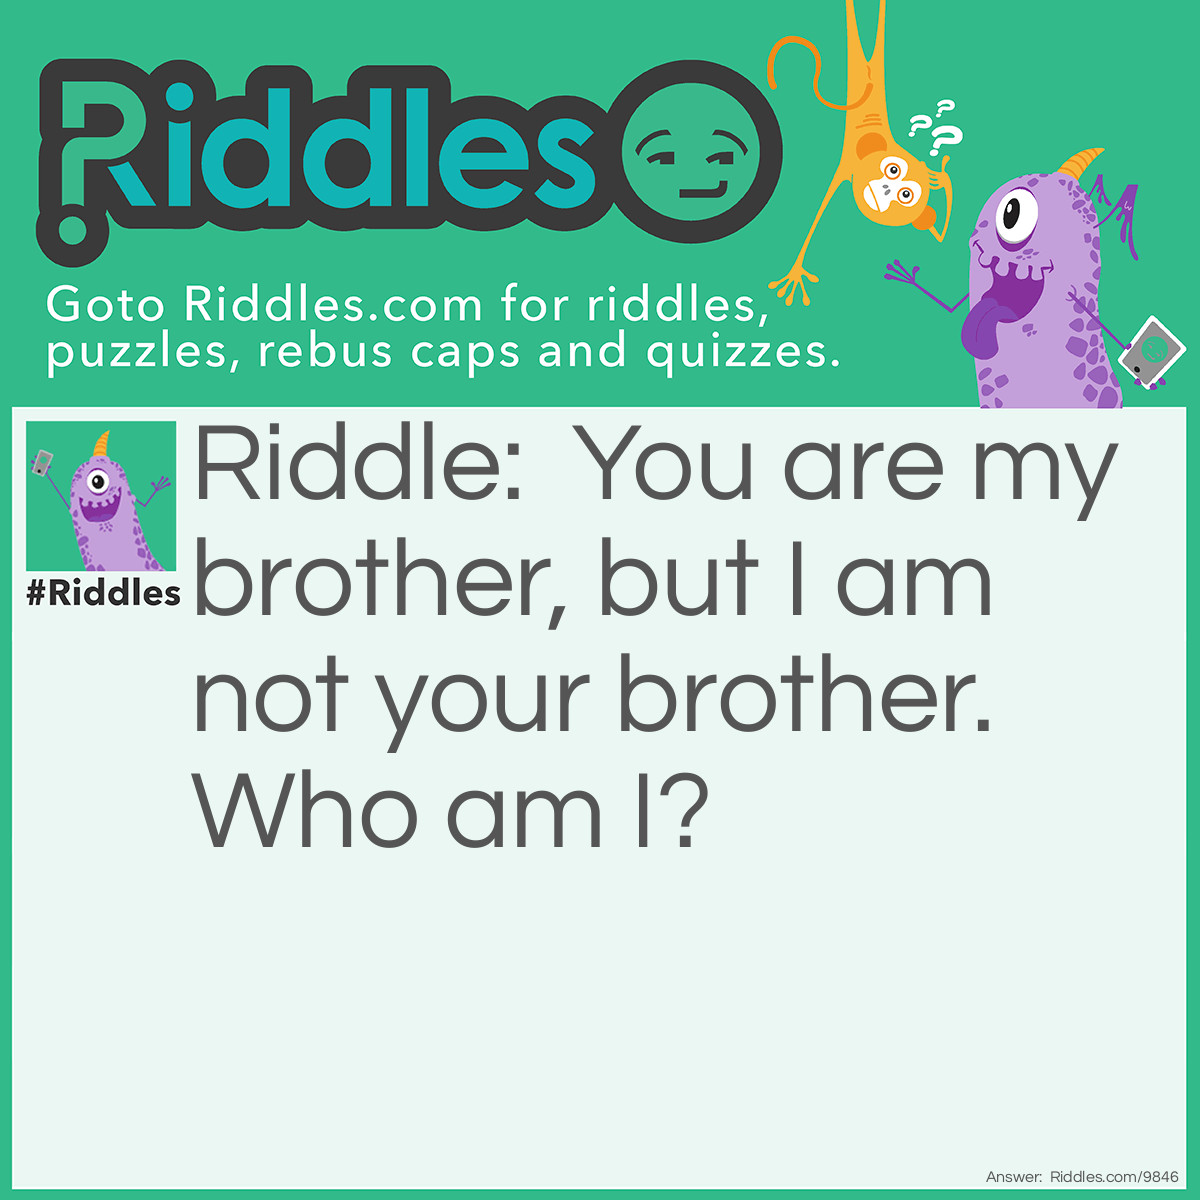 Riddle: You are my brother, but I am not your brother. <a href="/who-am-i-riddles">Who am I</a>? Answer: I am your sister.